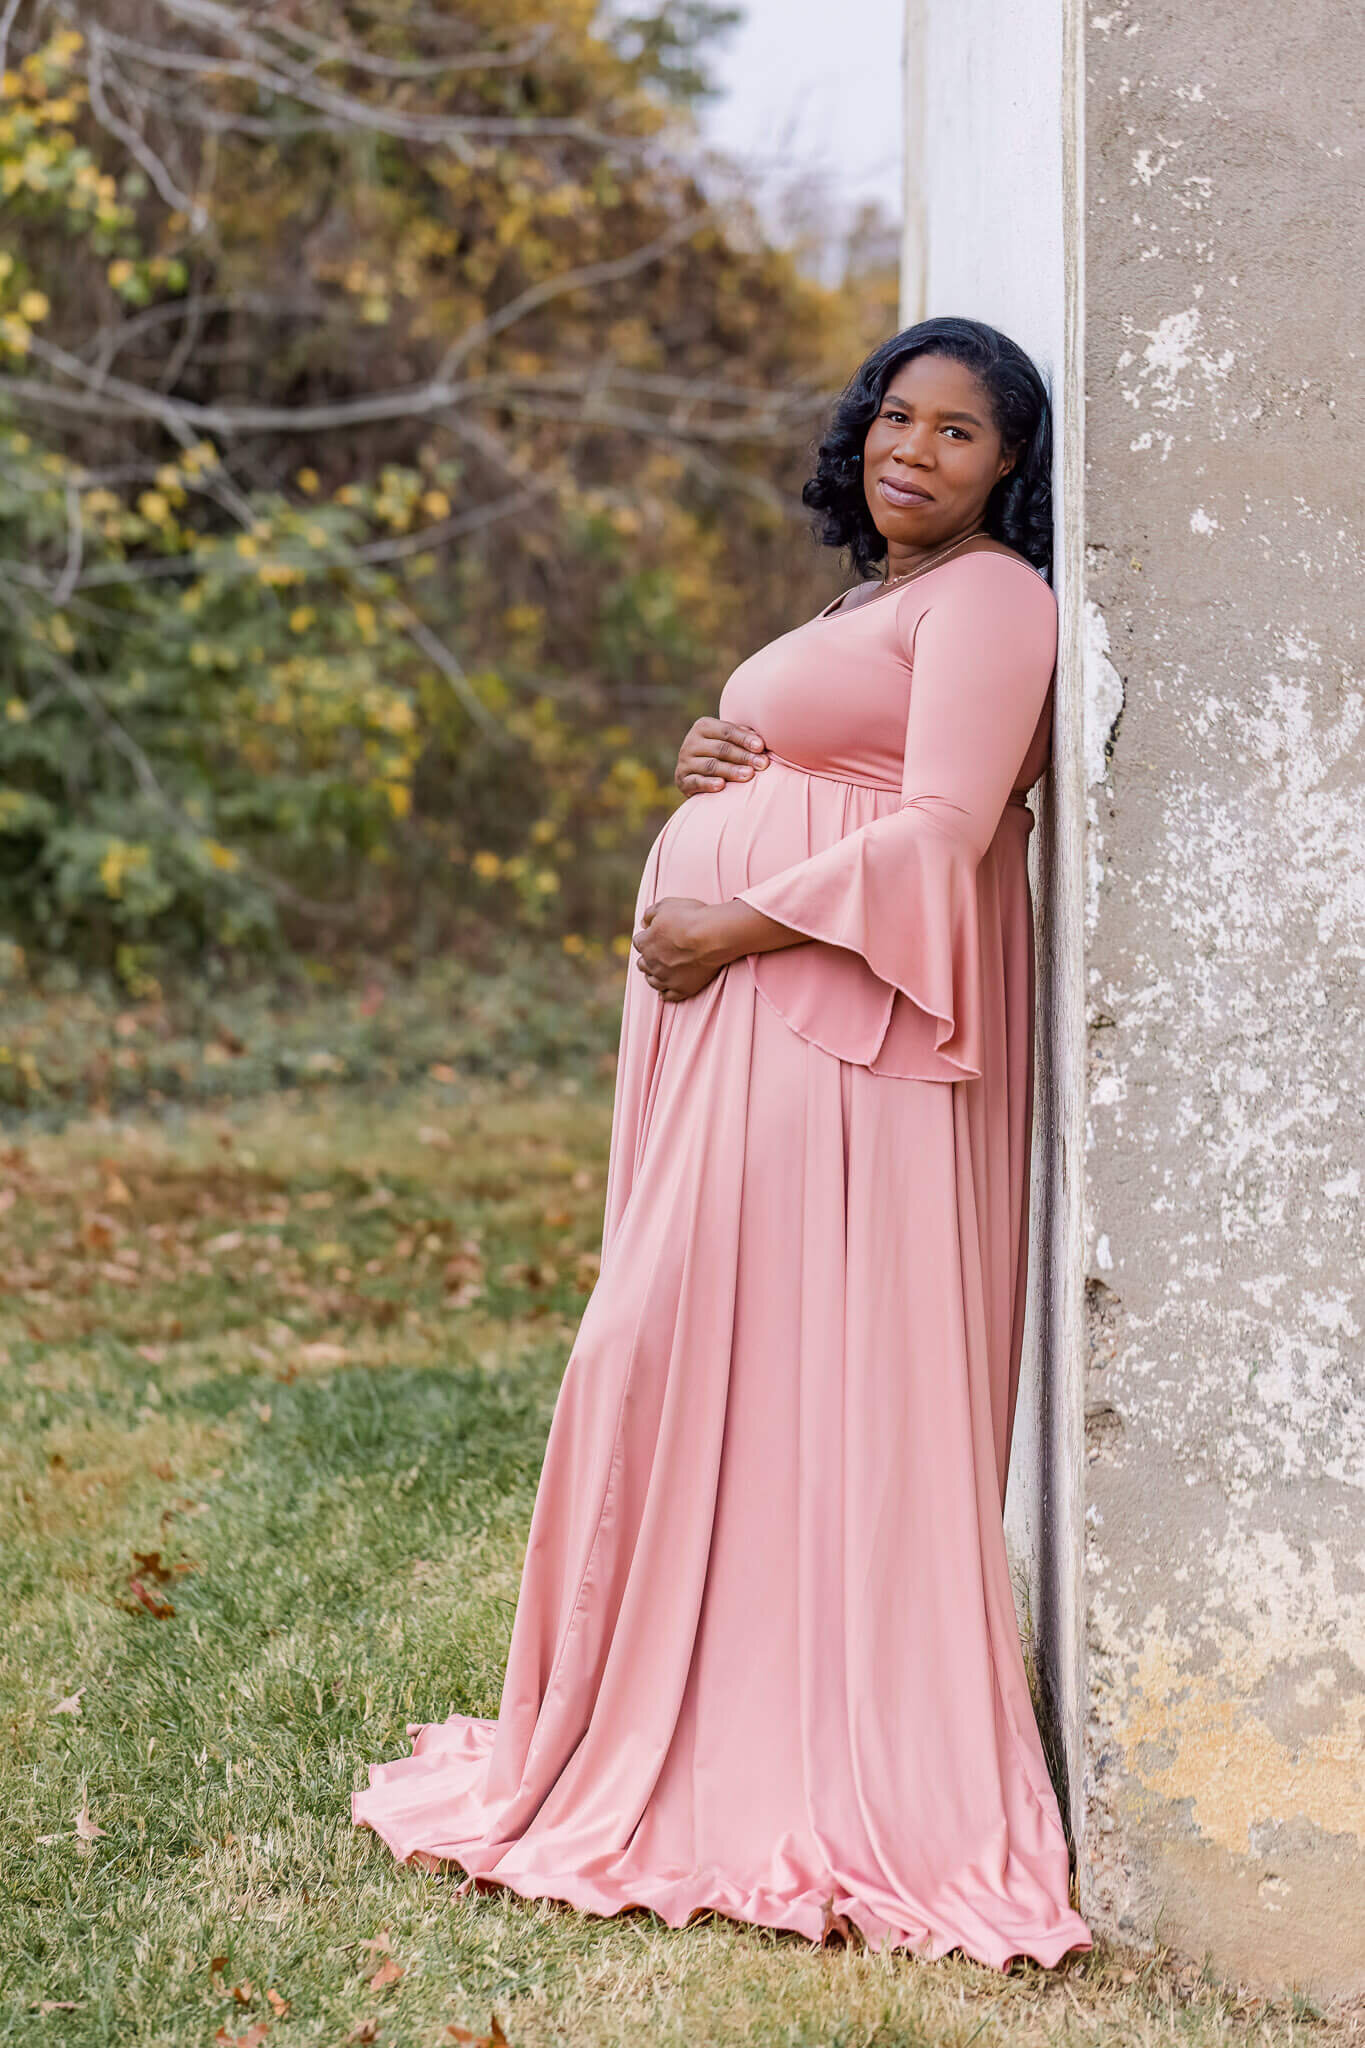 A beautiful mother-to-be leaning against a building during her maternity portraits.